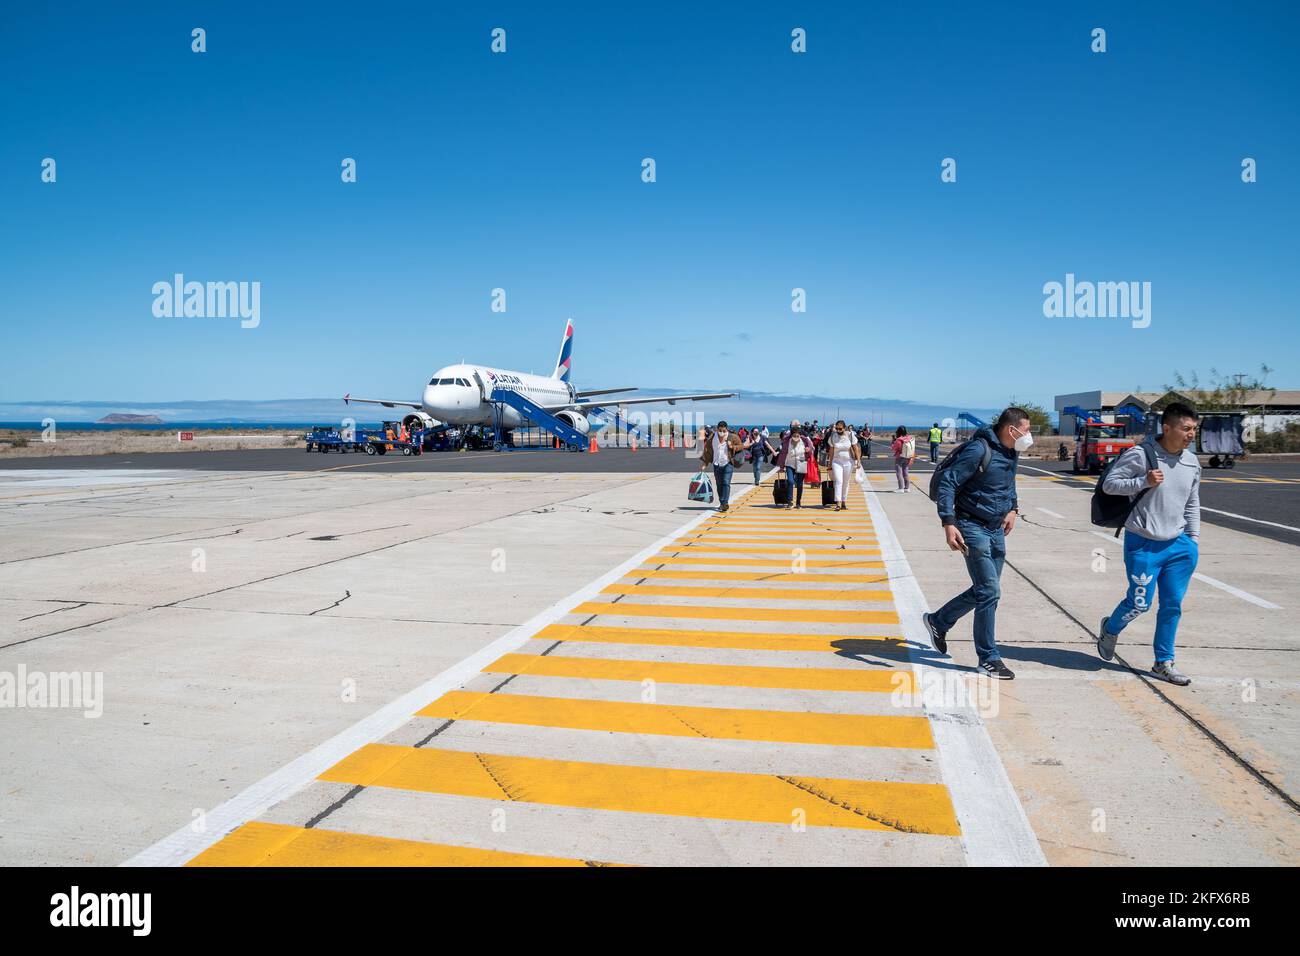 Passengers disembarking from the plane, Seymour Airport, Galapagos Islands Stock Photo